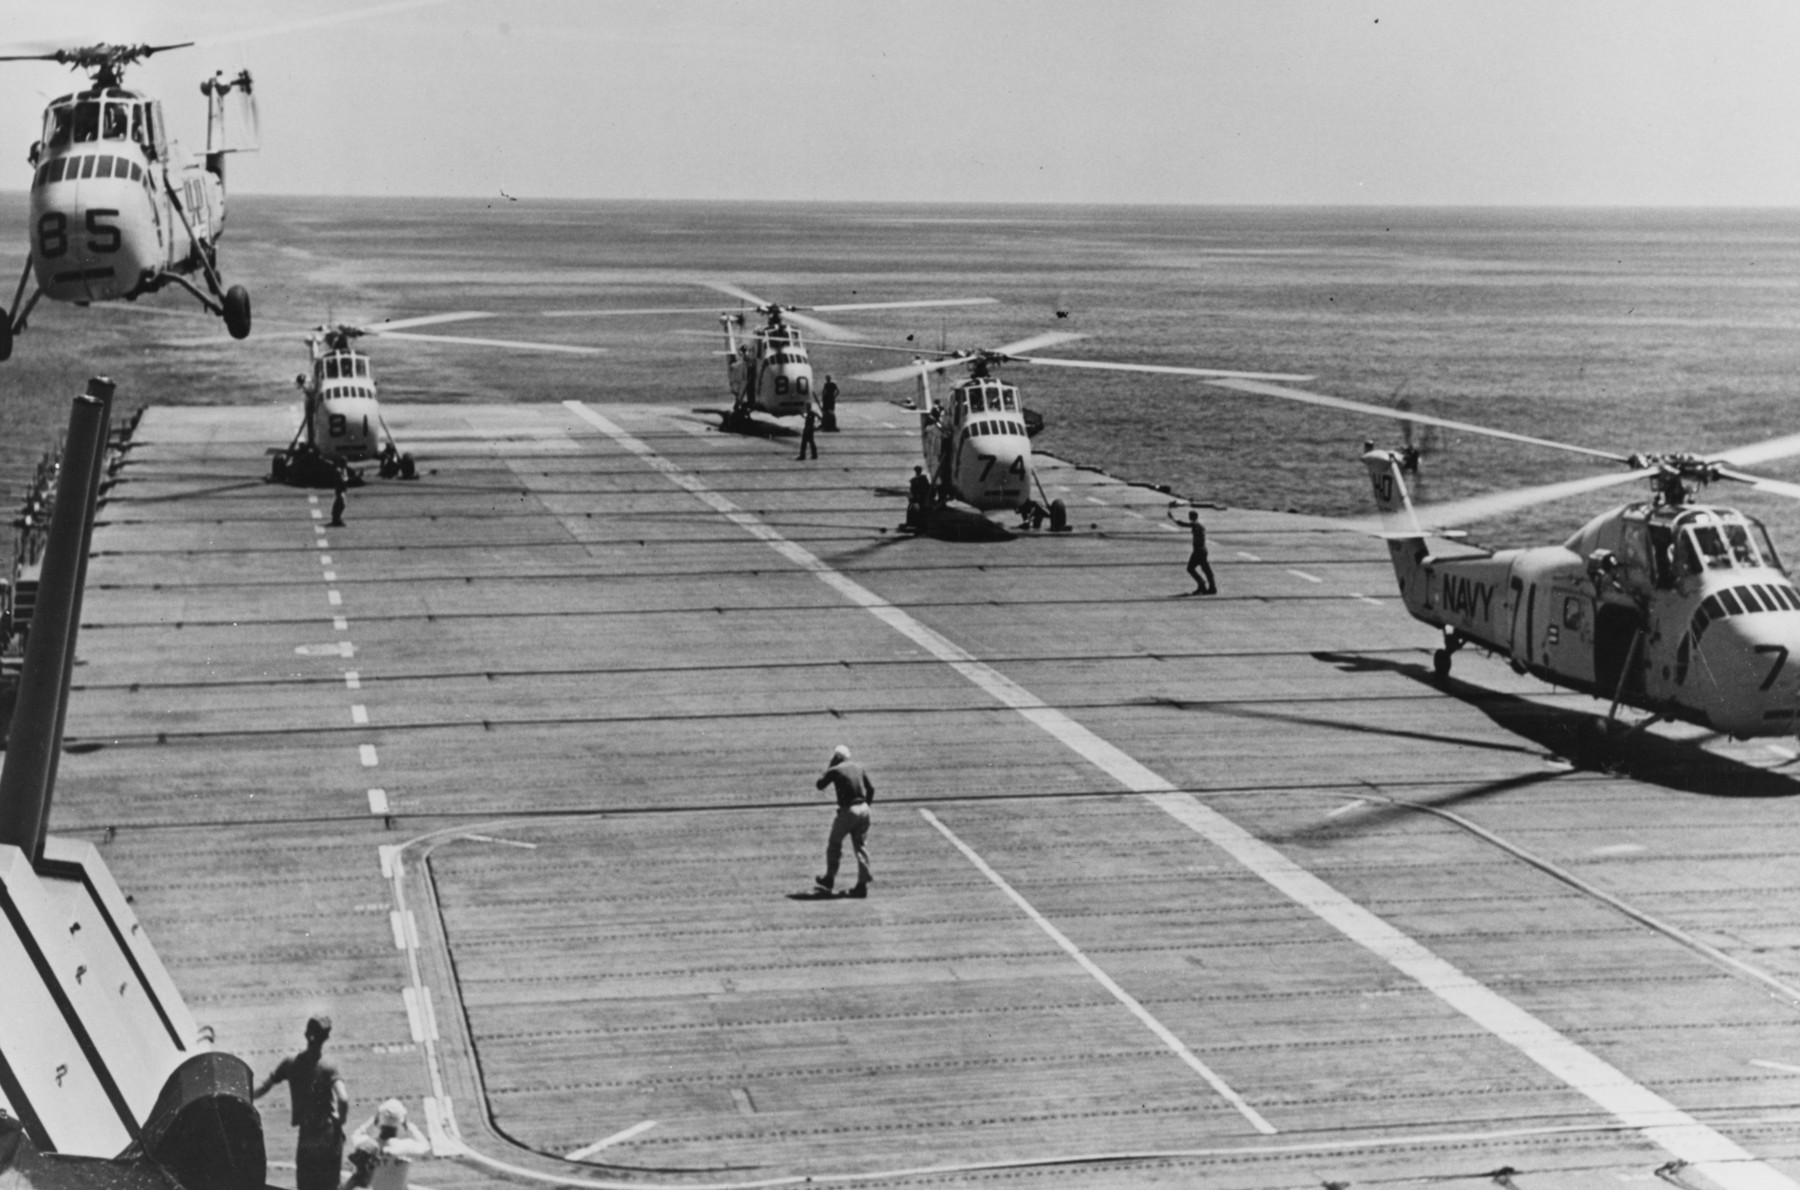 cvs-45 uss valley forge anti submarine aircraft carrier us navy 40 sikorsky hss-1